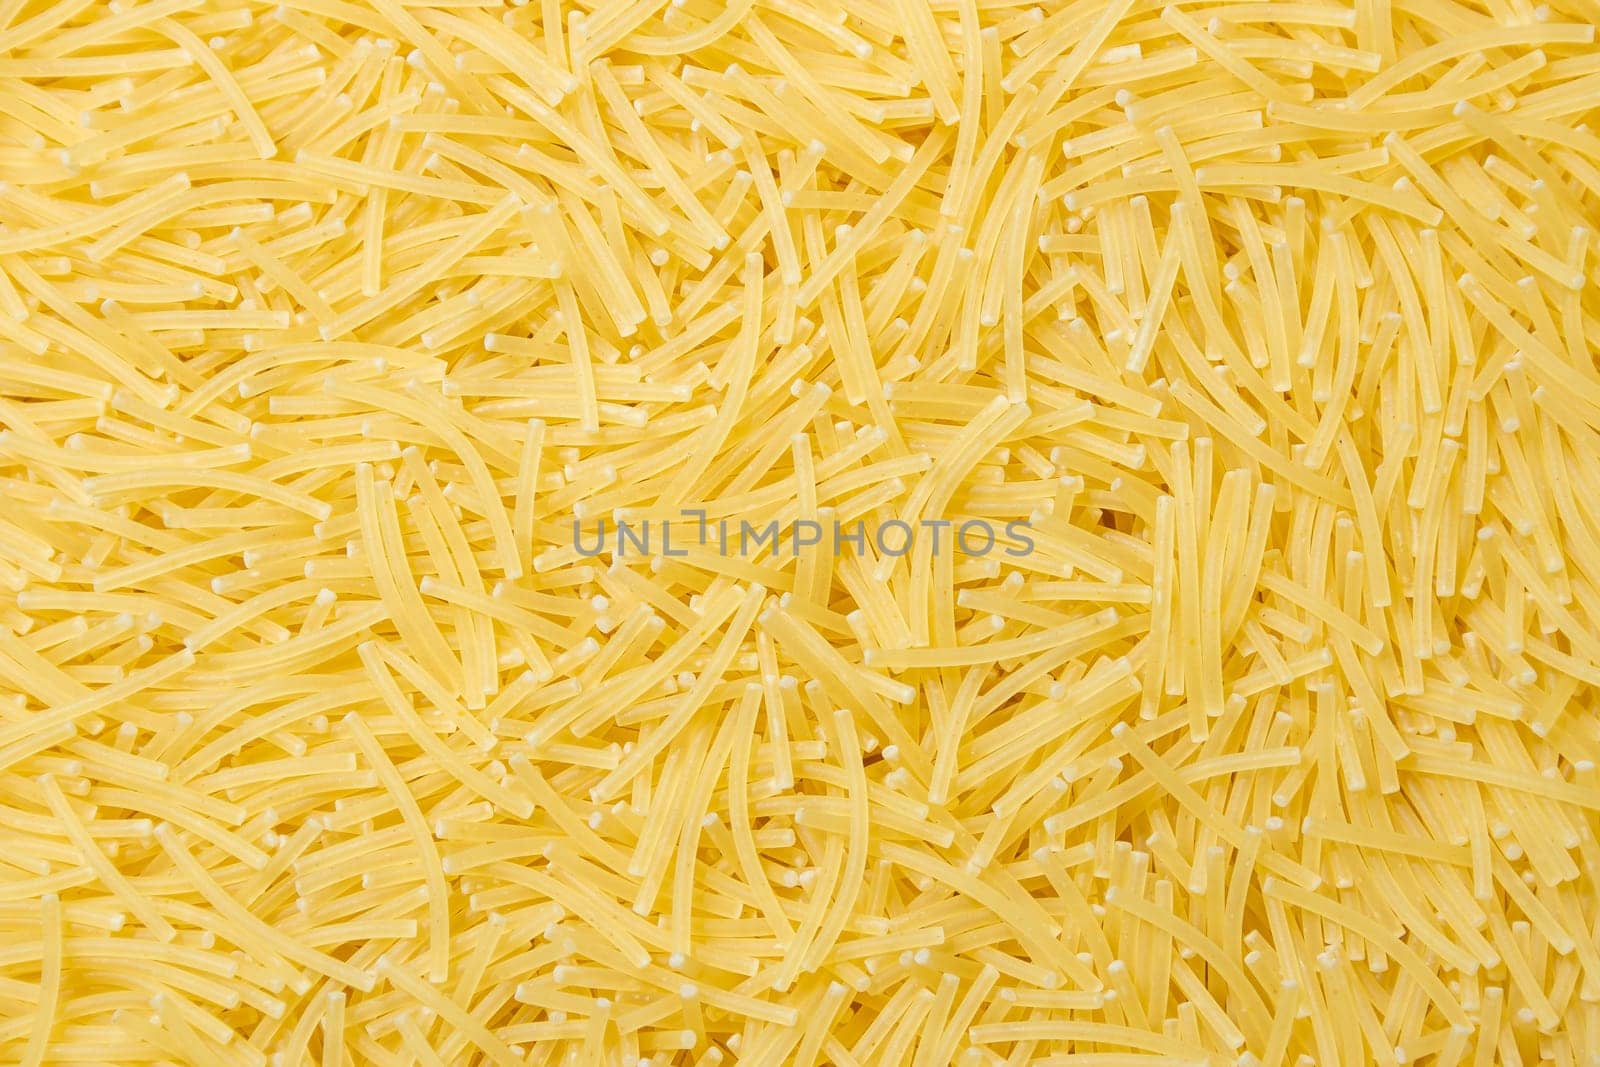 Uncooked Filini Pasta: A Culinary Canvas of Noodles, Creating a Lively and Textured Background for Gourmet Cooking. Dry Pasta. Raw Macaroni - Top View, Flat Lay